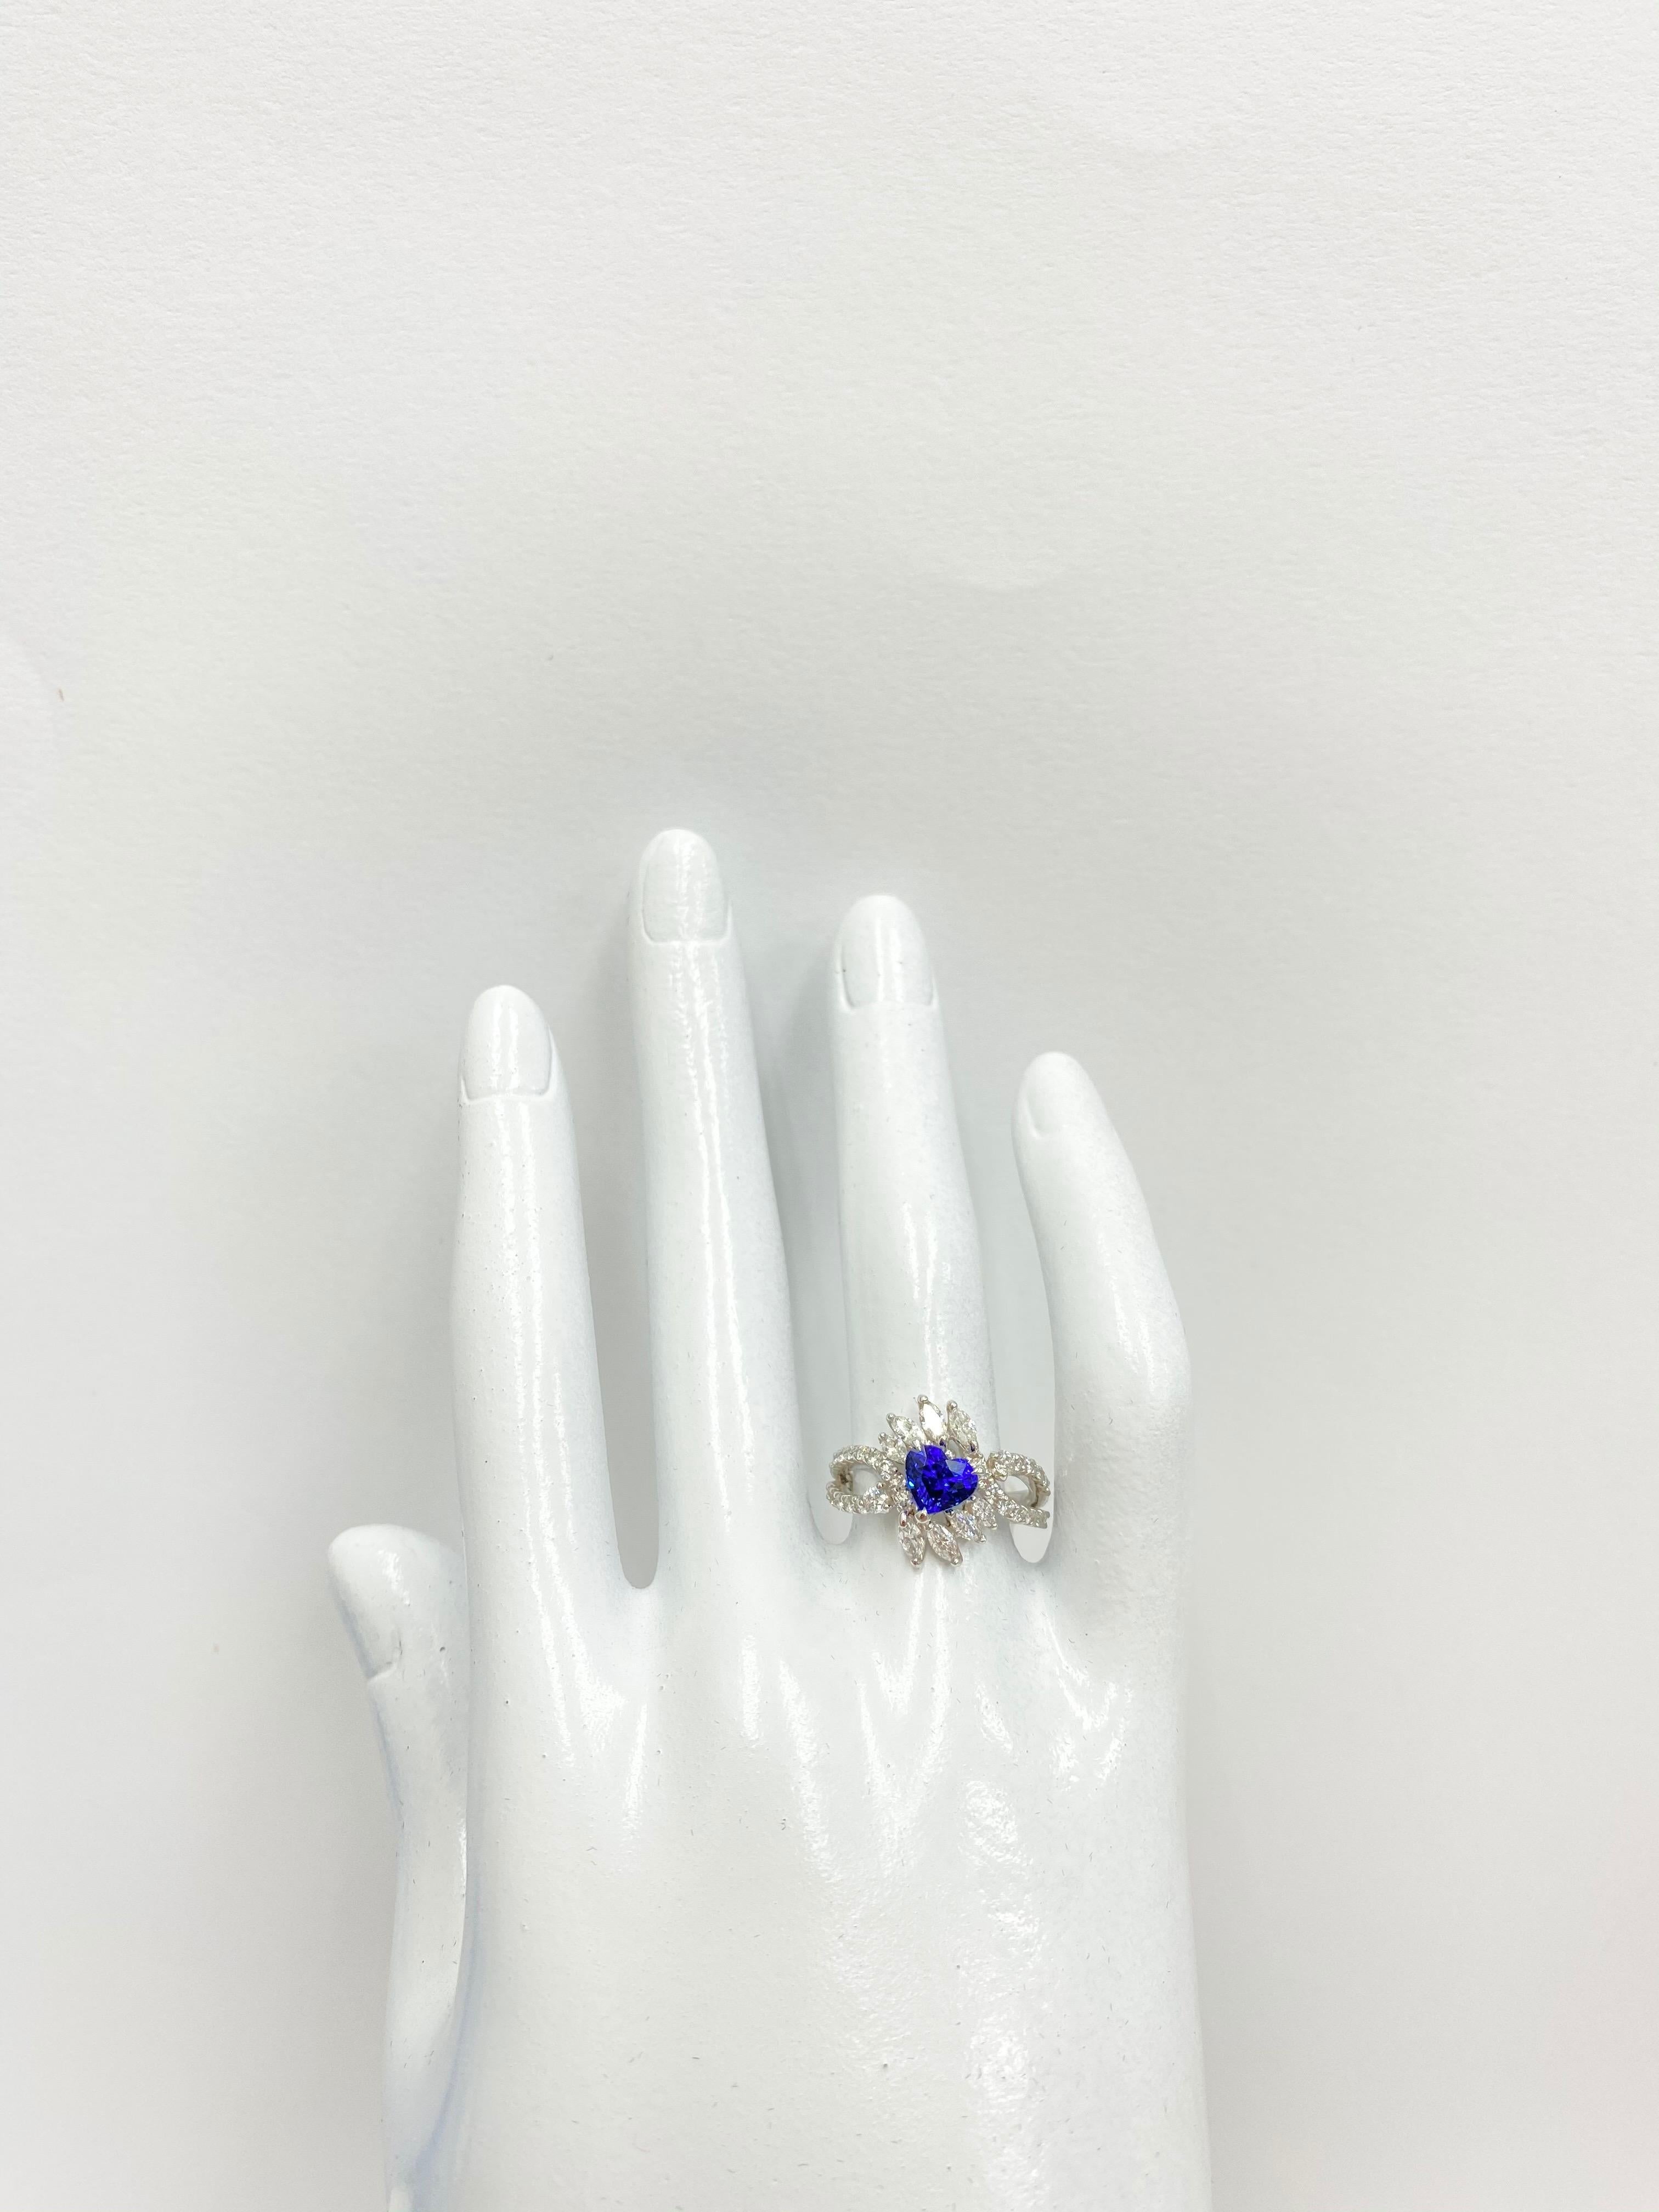 A stunning Engagement Ring featuring a 1.37 Carat Vivid Blue Sapphire and 0.97 Carats of Round Brilliant Diamond Accents set in Platinum. Sapphires have extraordinary durability - they excel in hardness as well as toughness and durability making